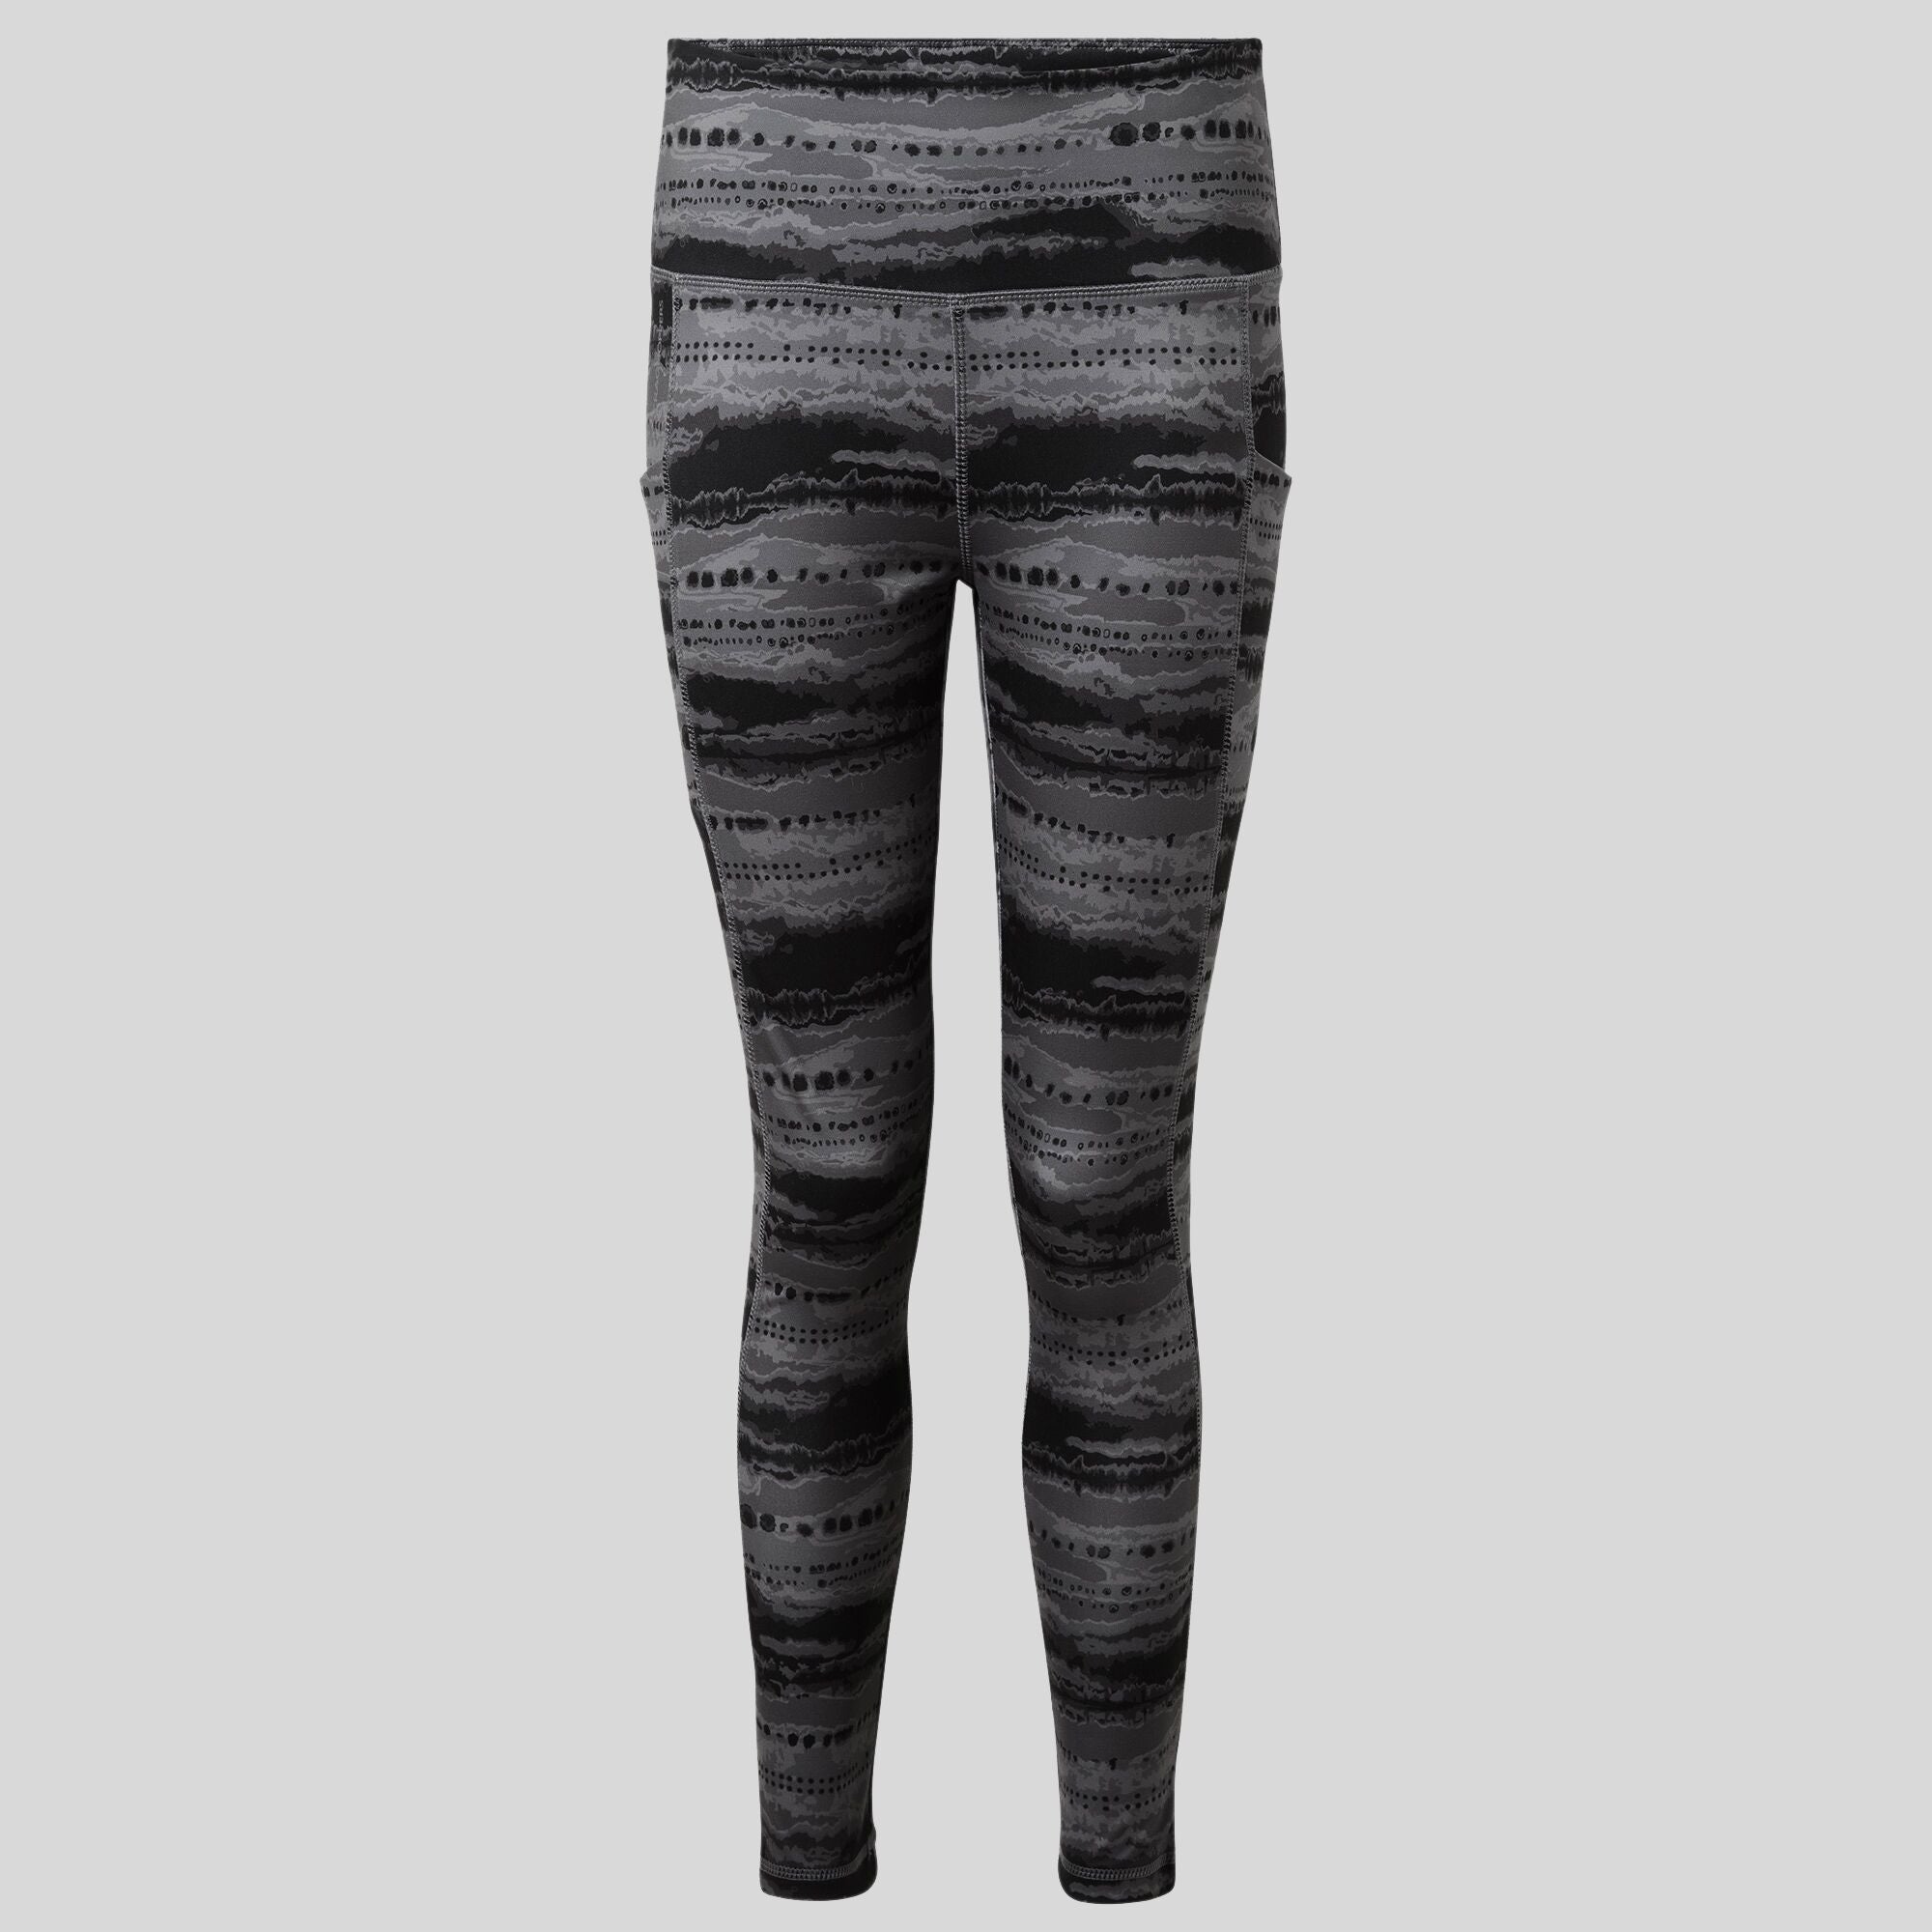 Women's Insect Shield® Pro Legging | Charcoal Print